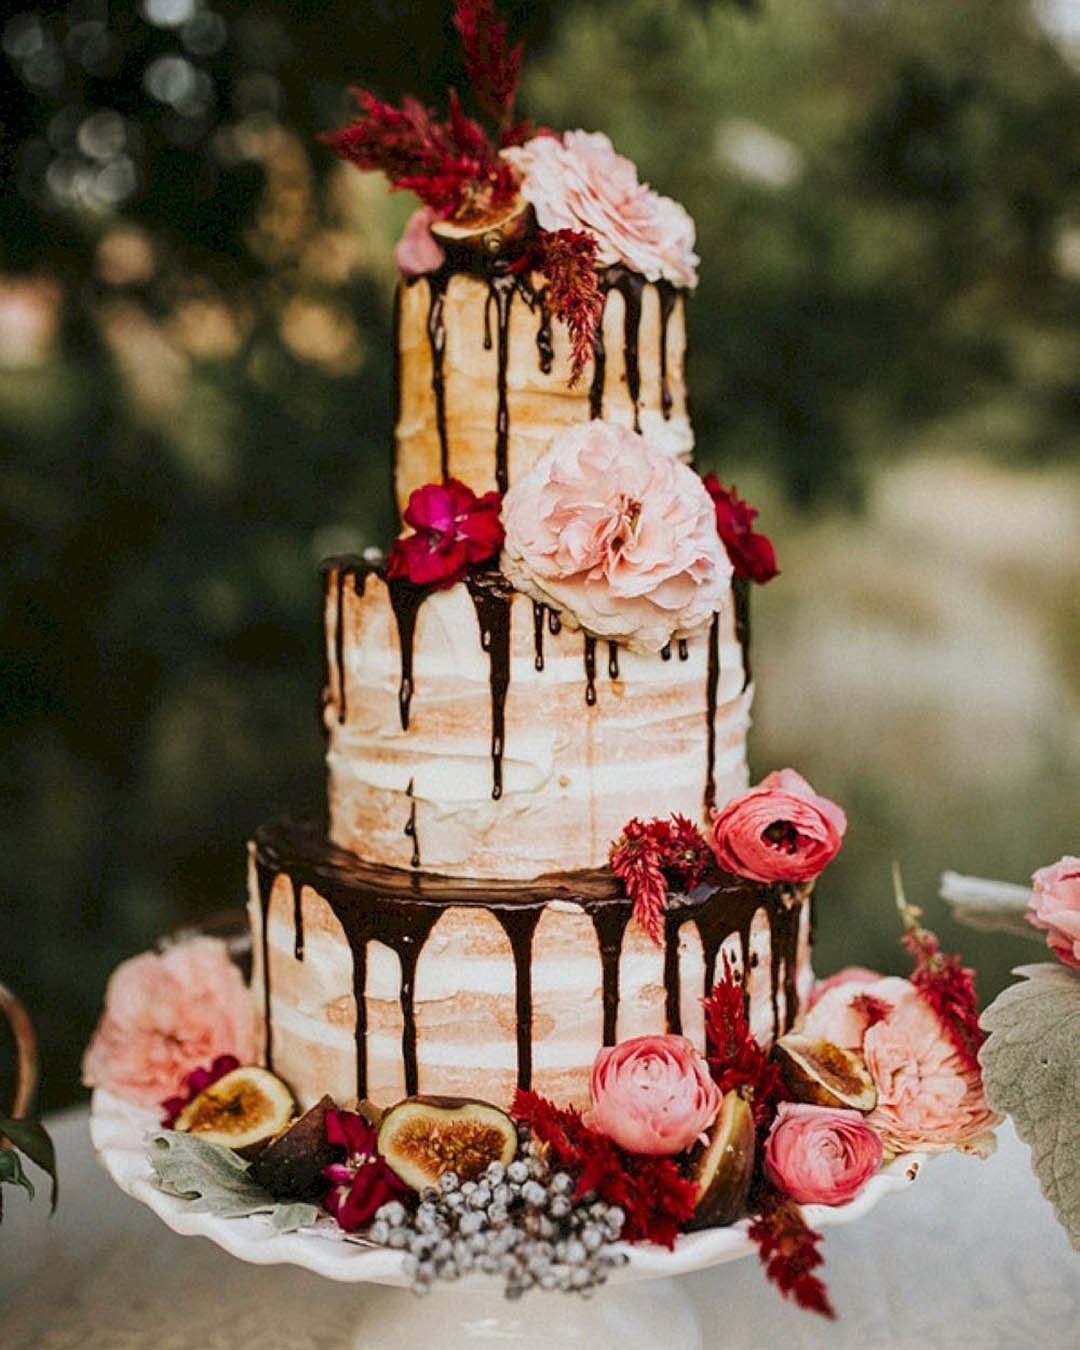 drip wedding cakes rustic nacked with fruits flowers